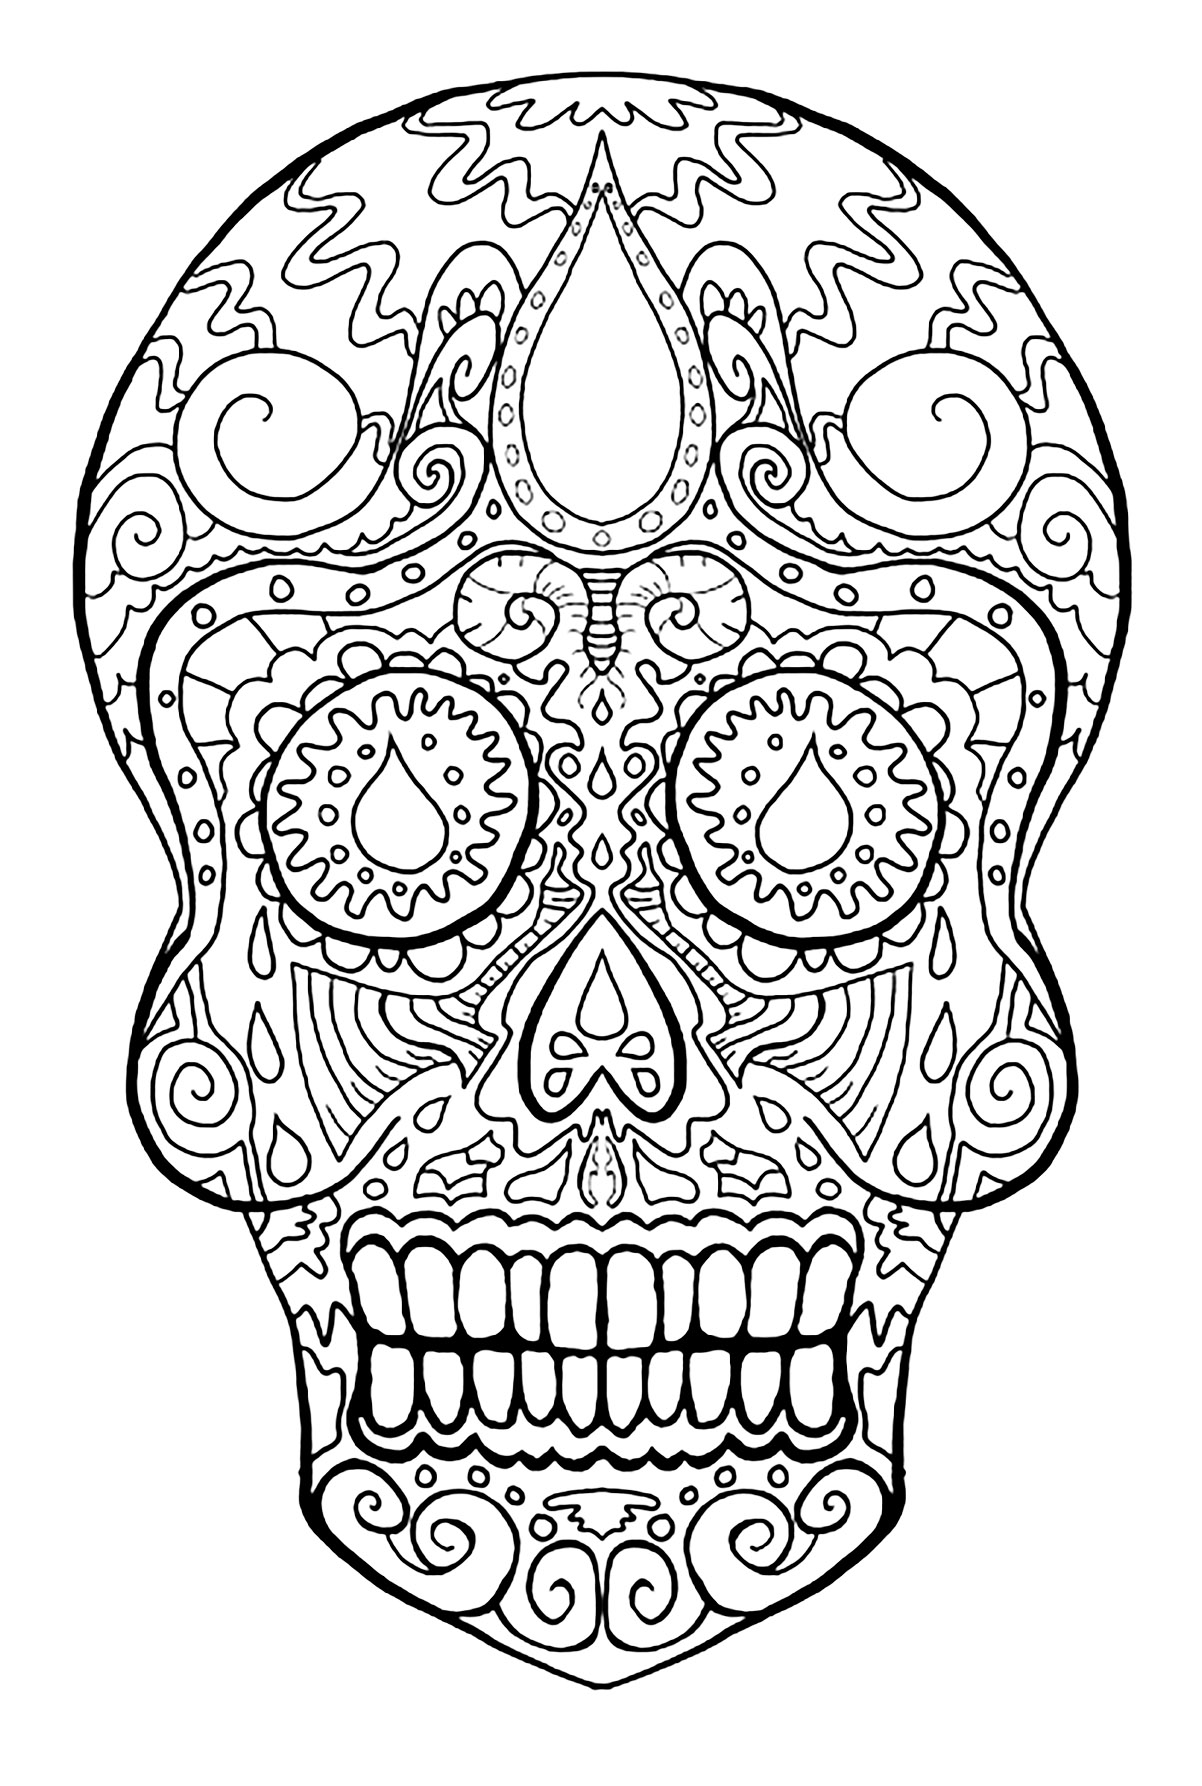 Dãas de los muertos day of the dead coloring pages to print for free